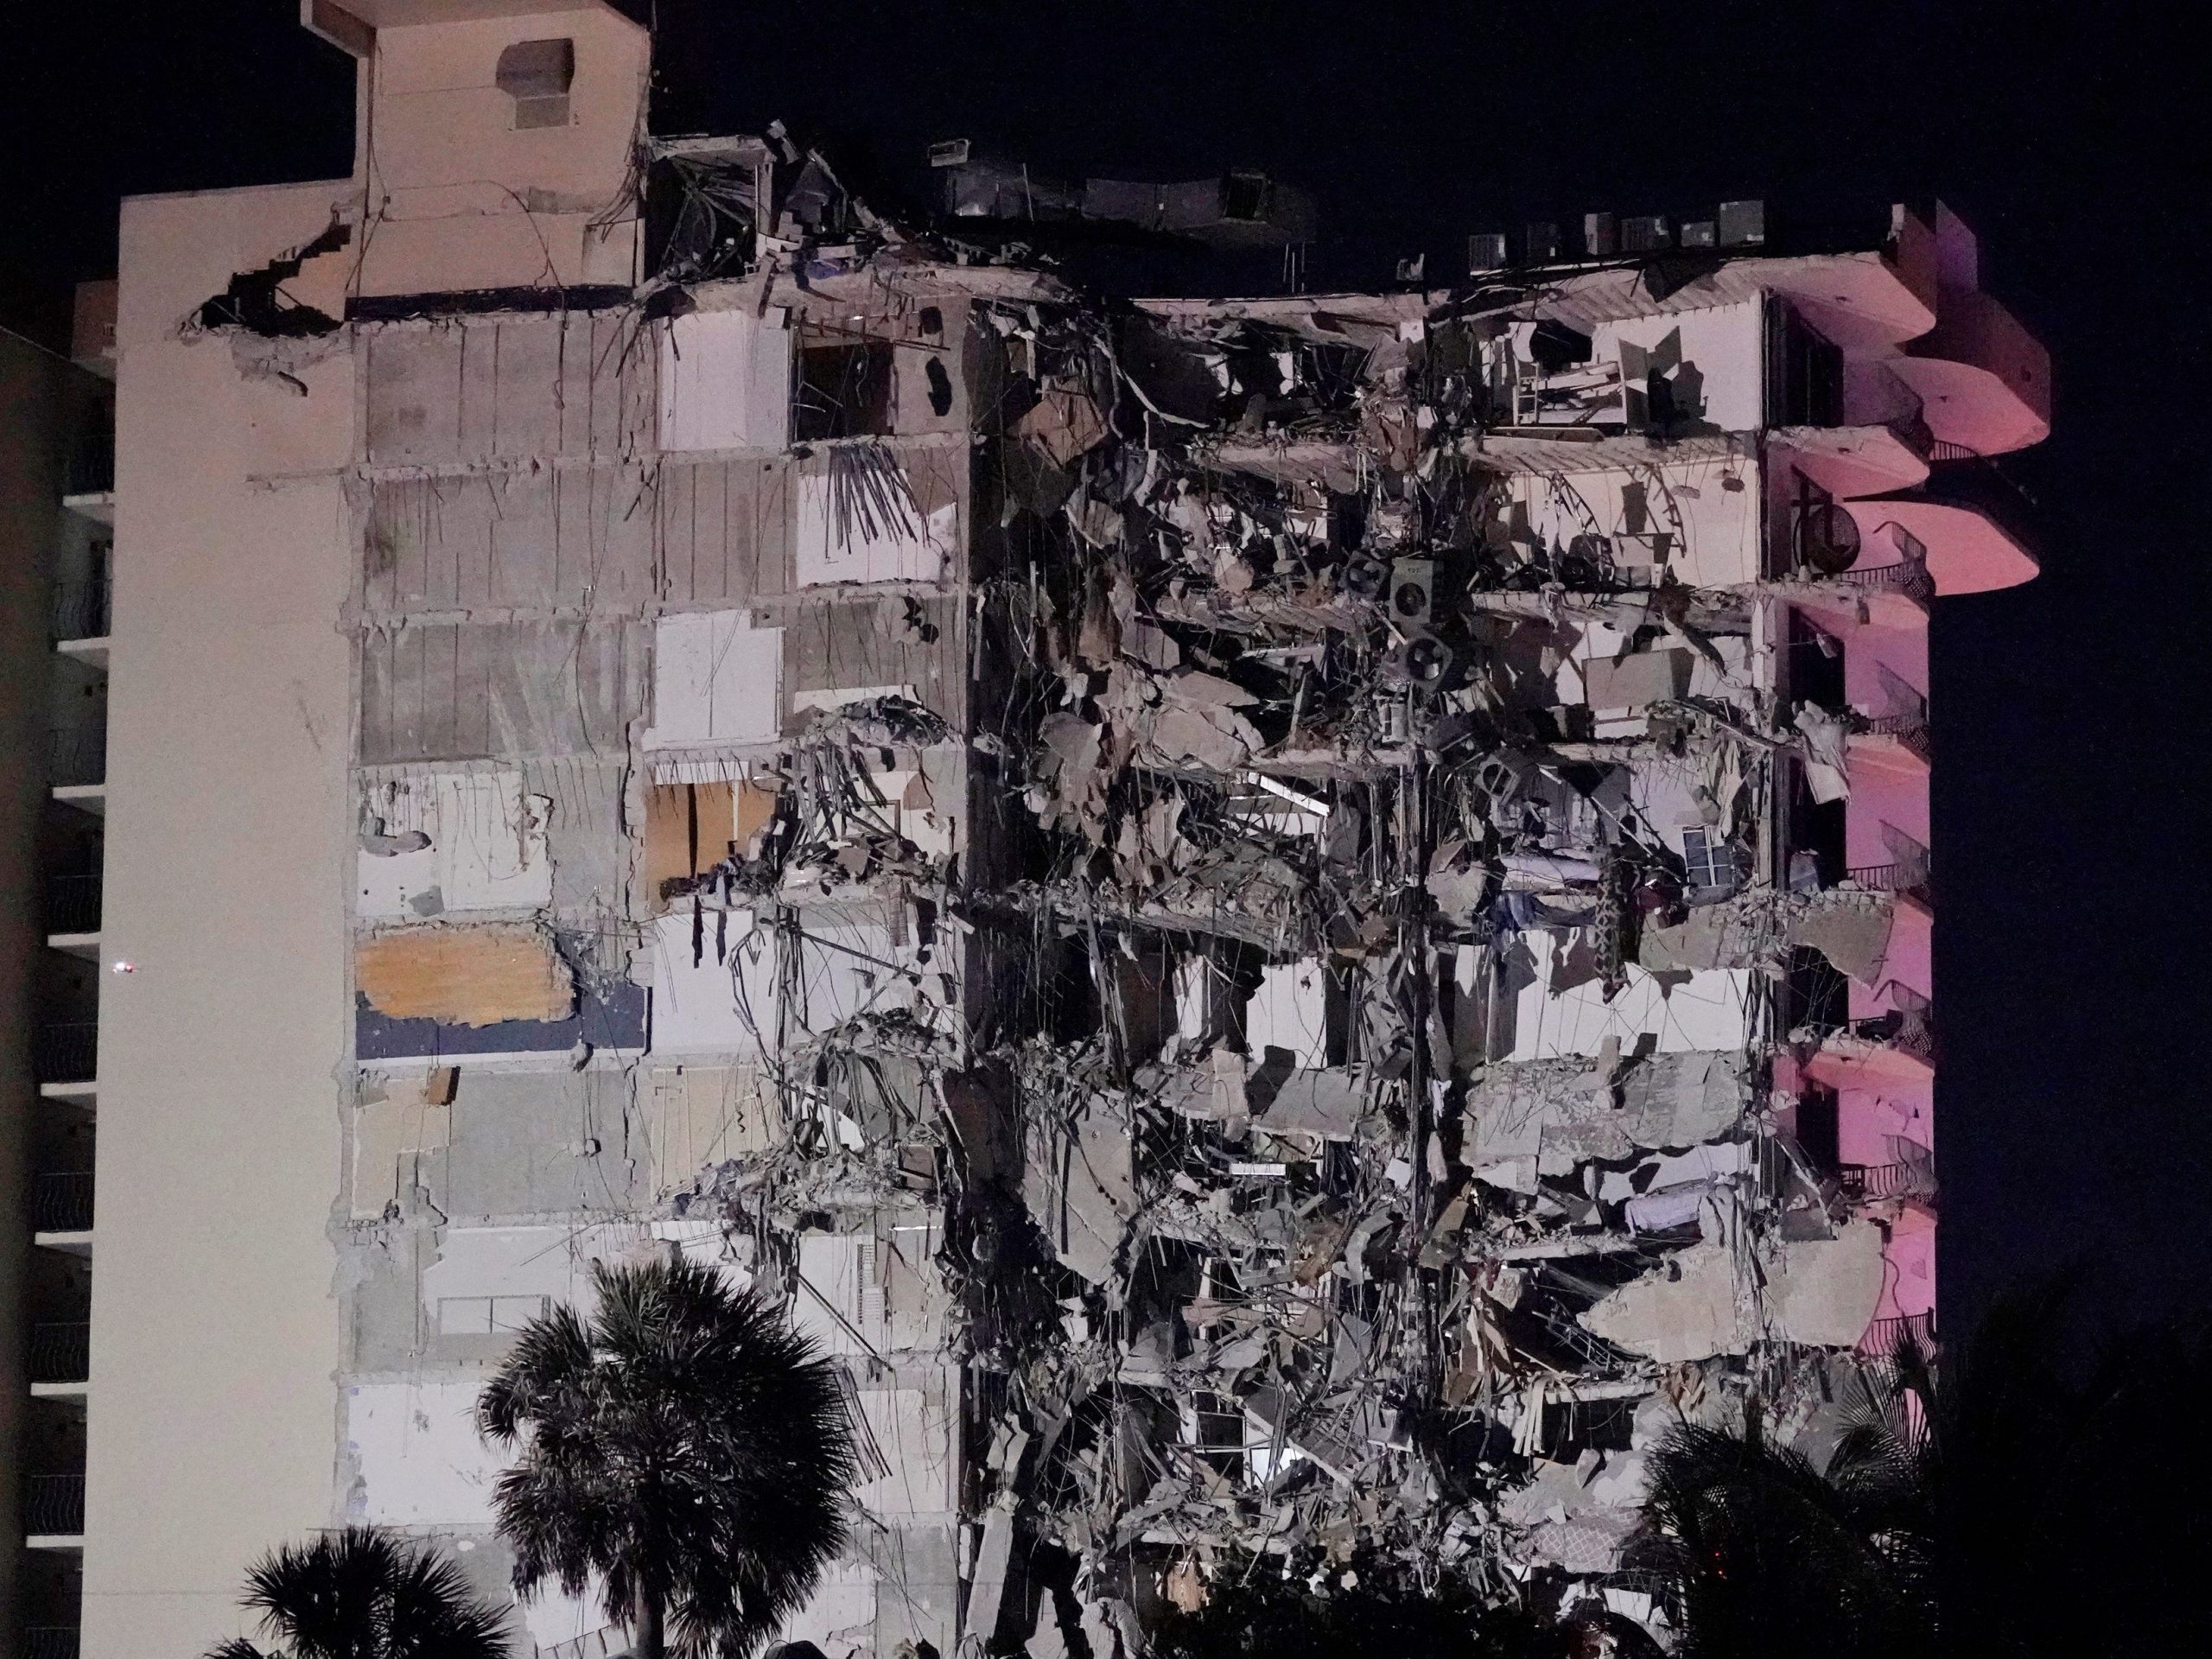 Building collapse in Surfside, Florida